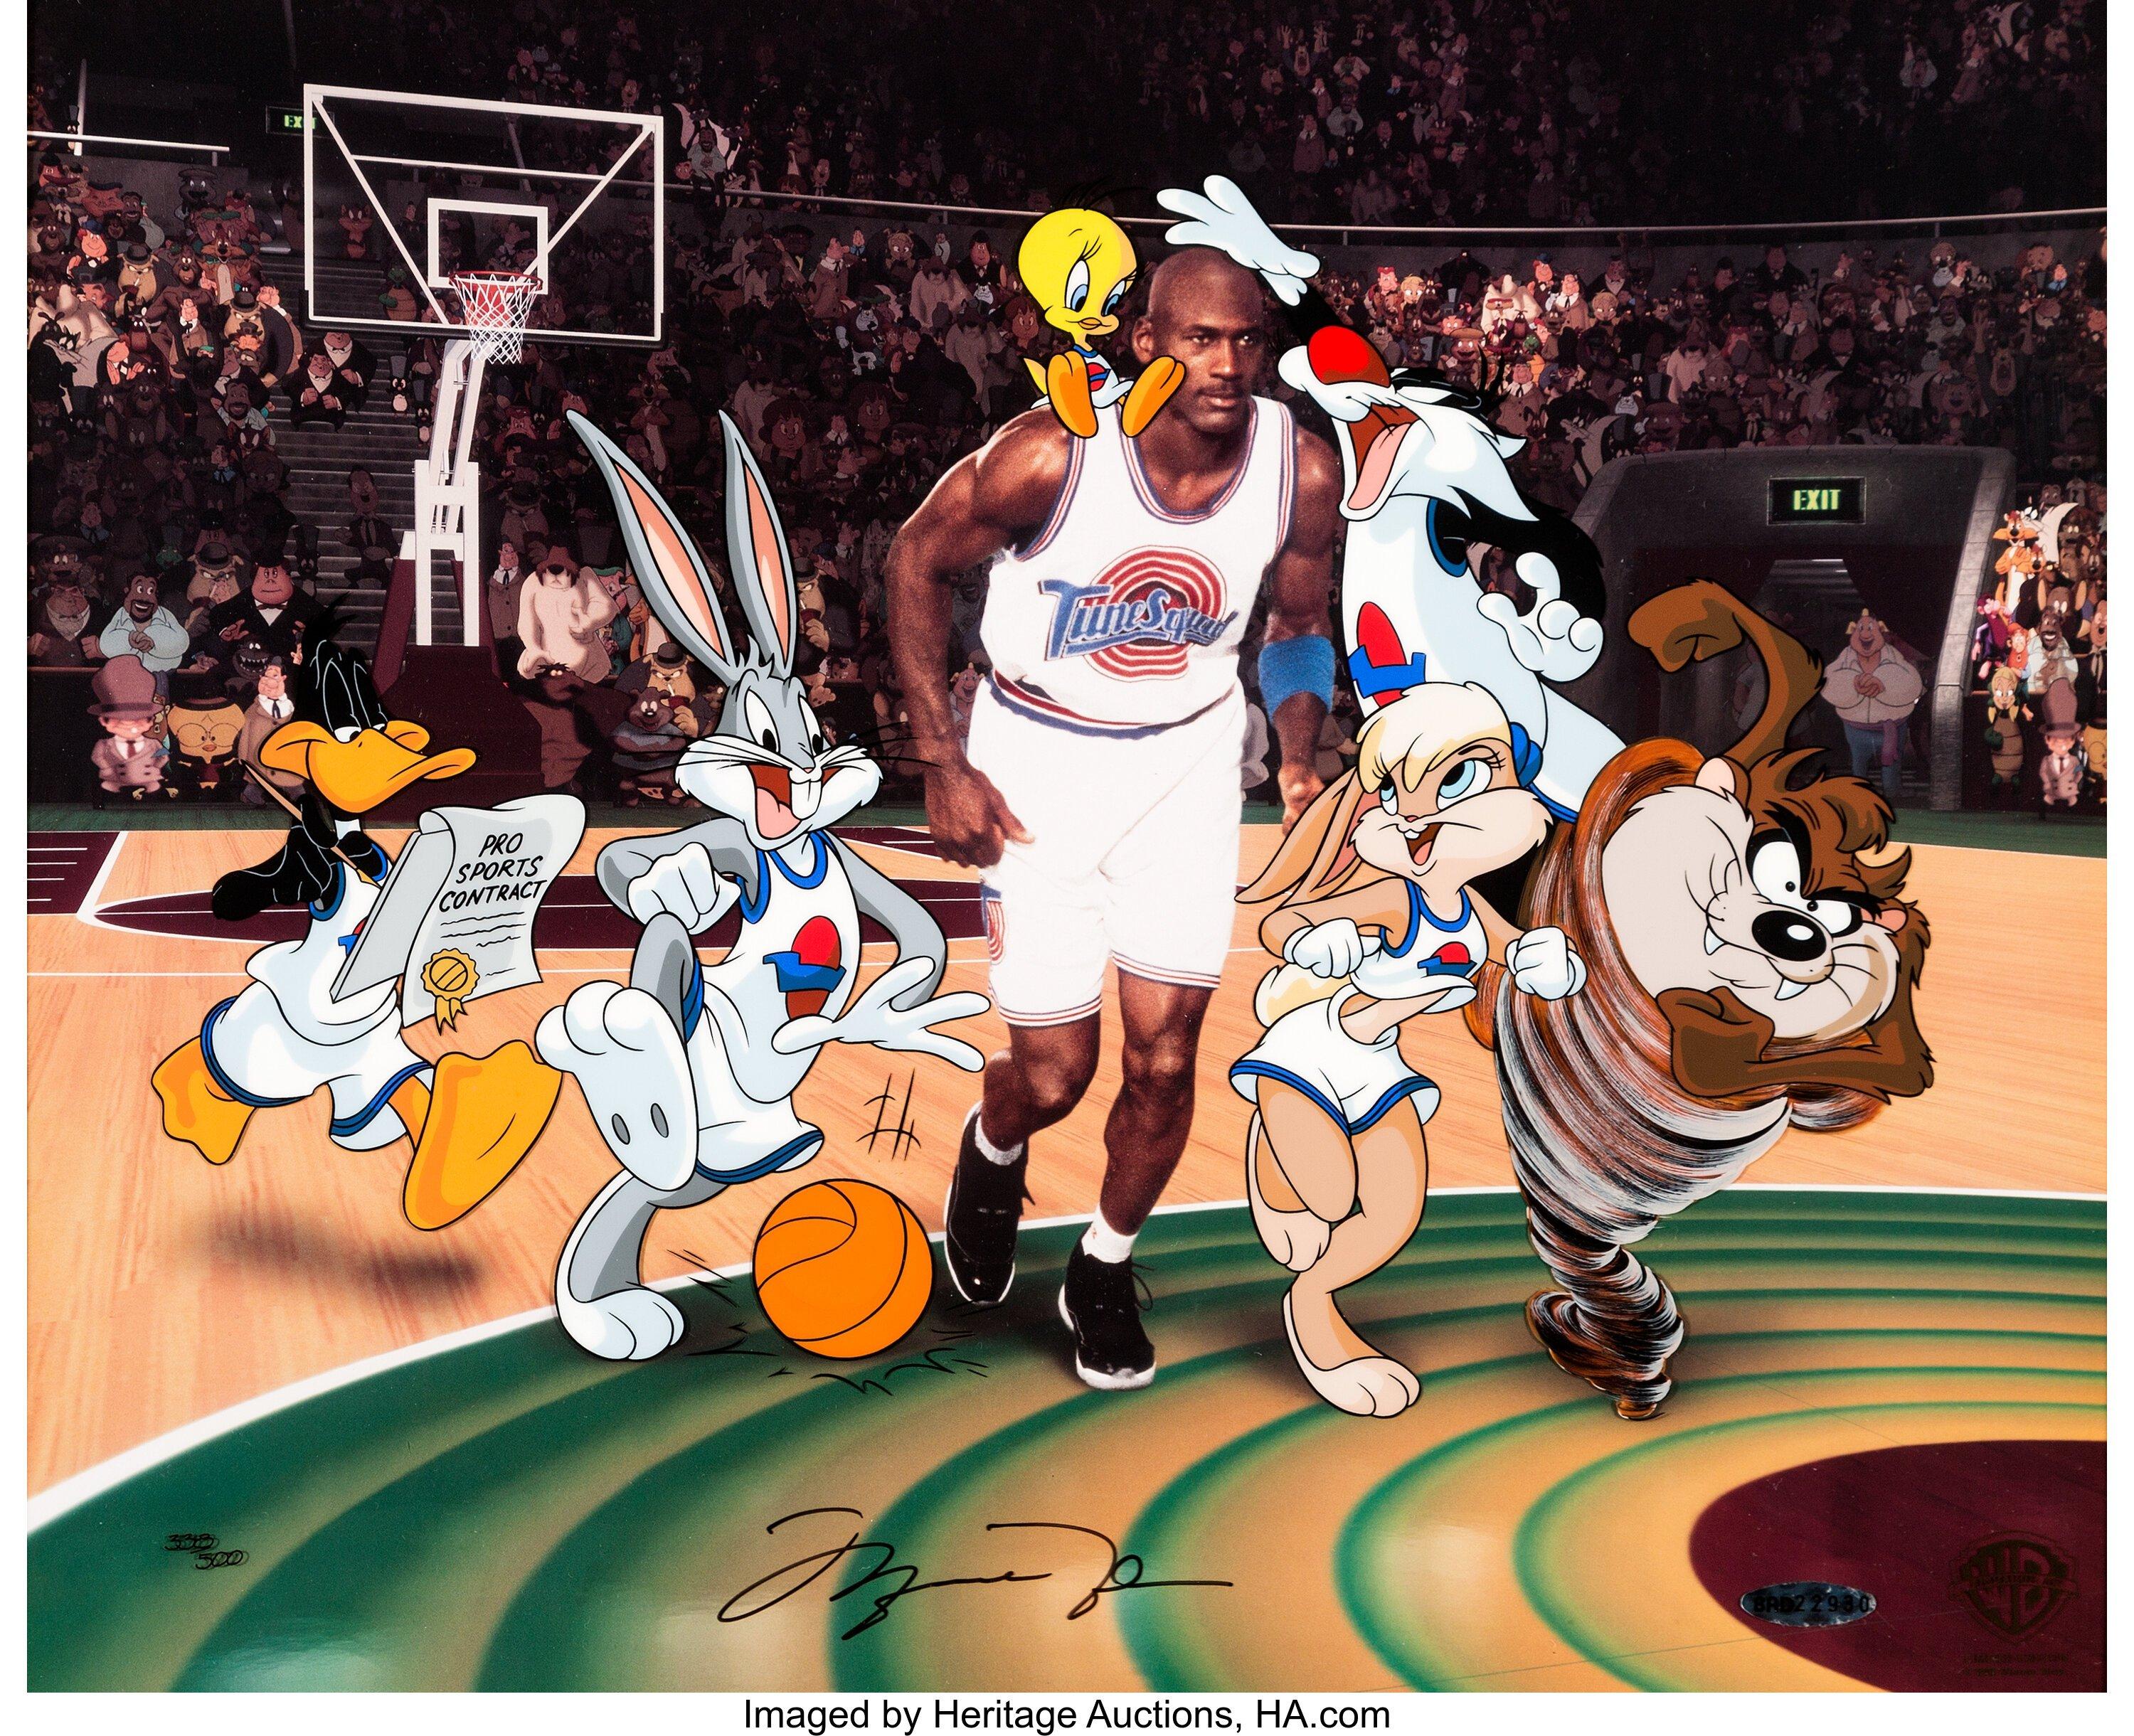 Space Jam HD Wallpapers and Backgrounds